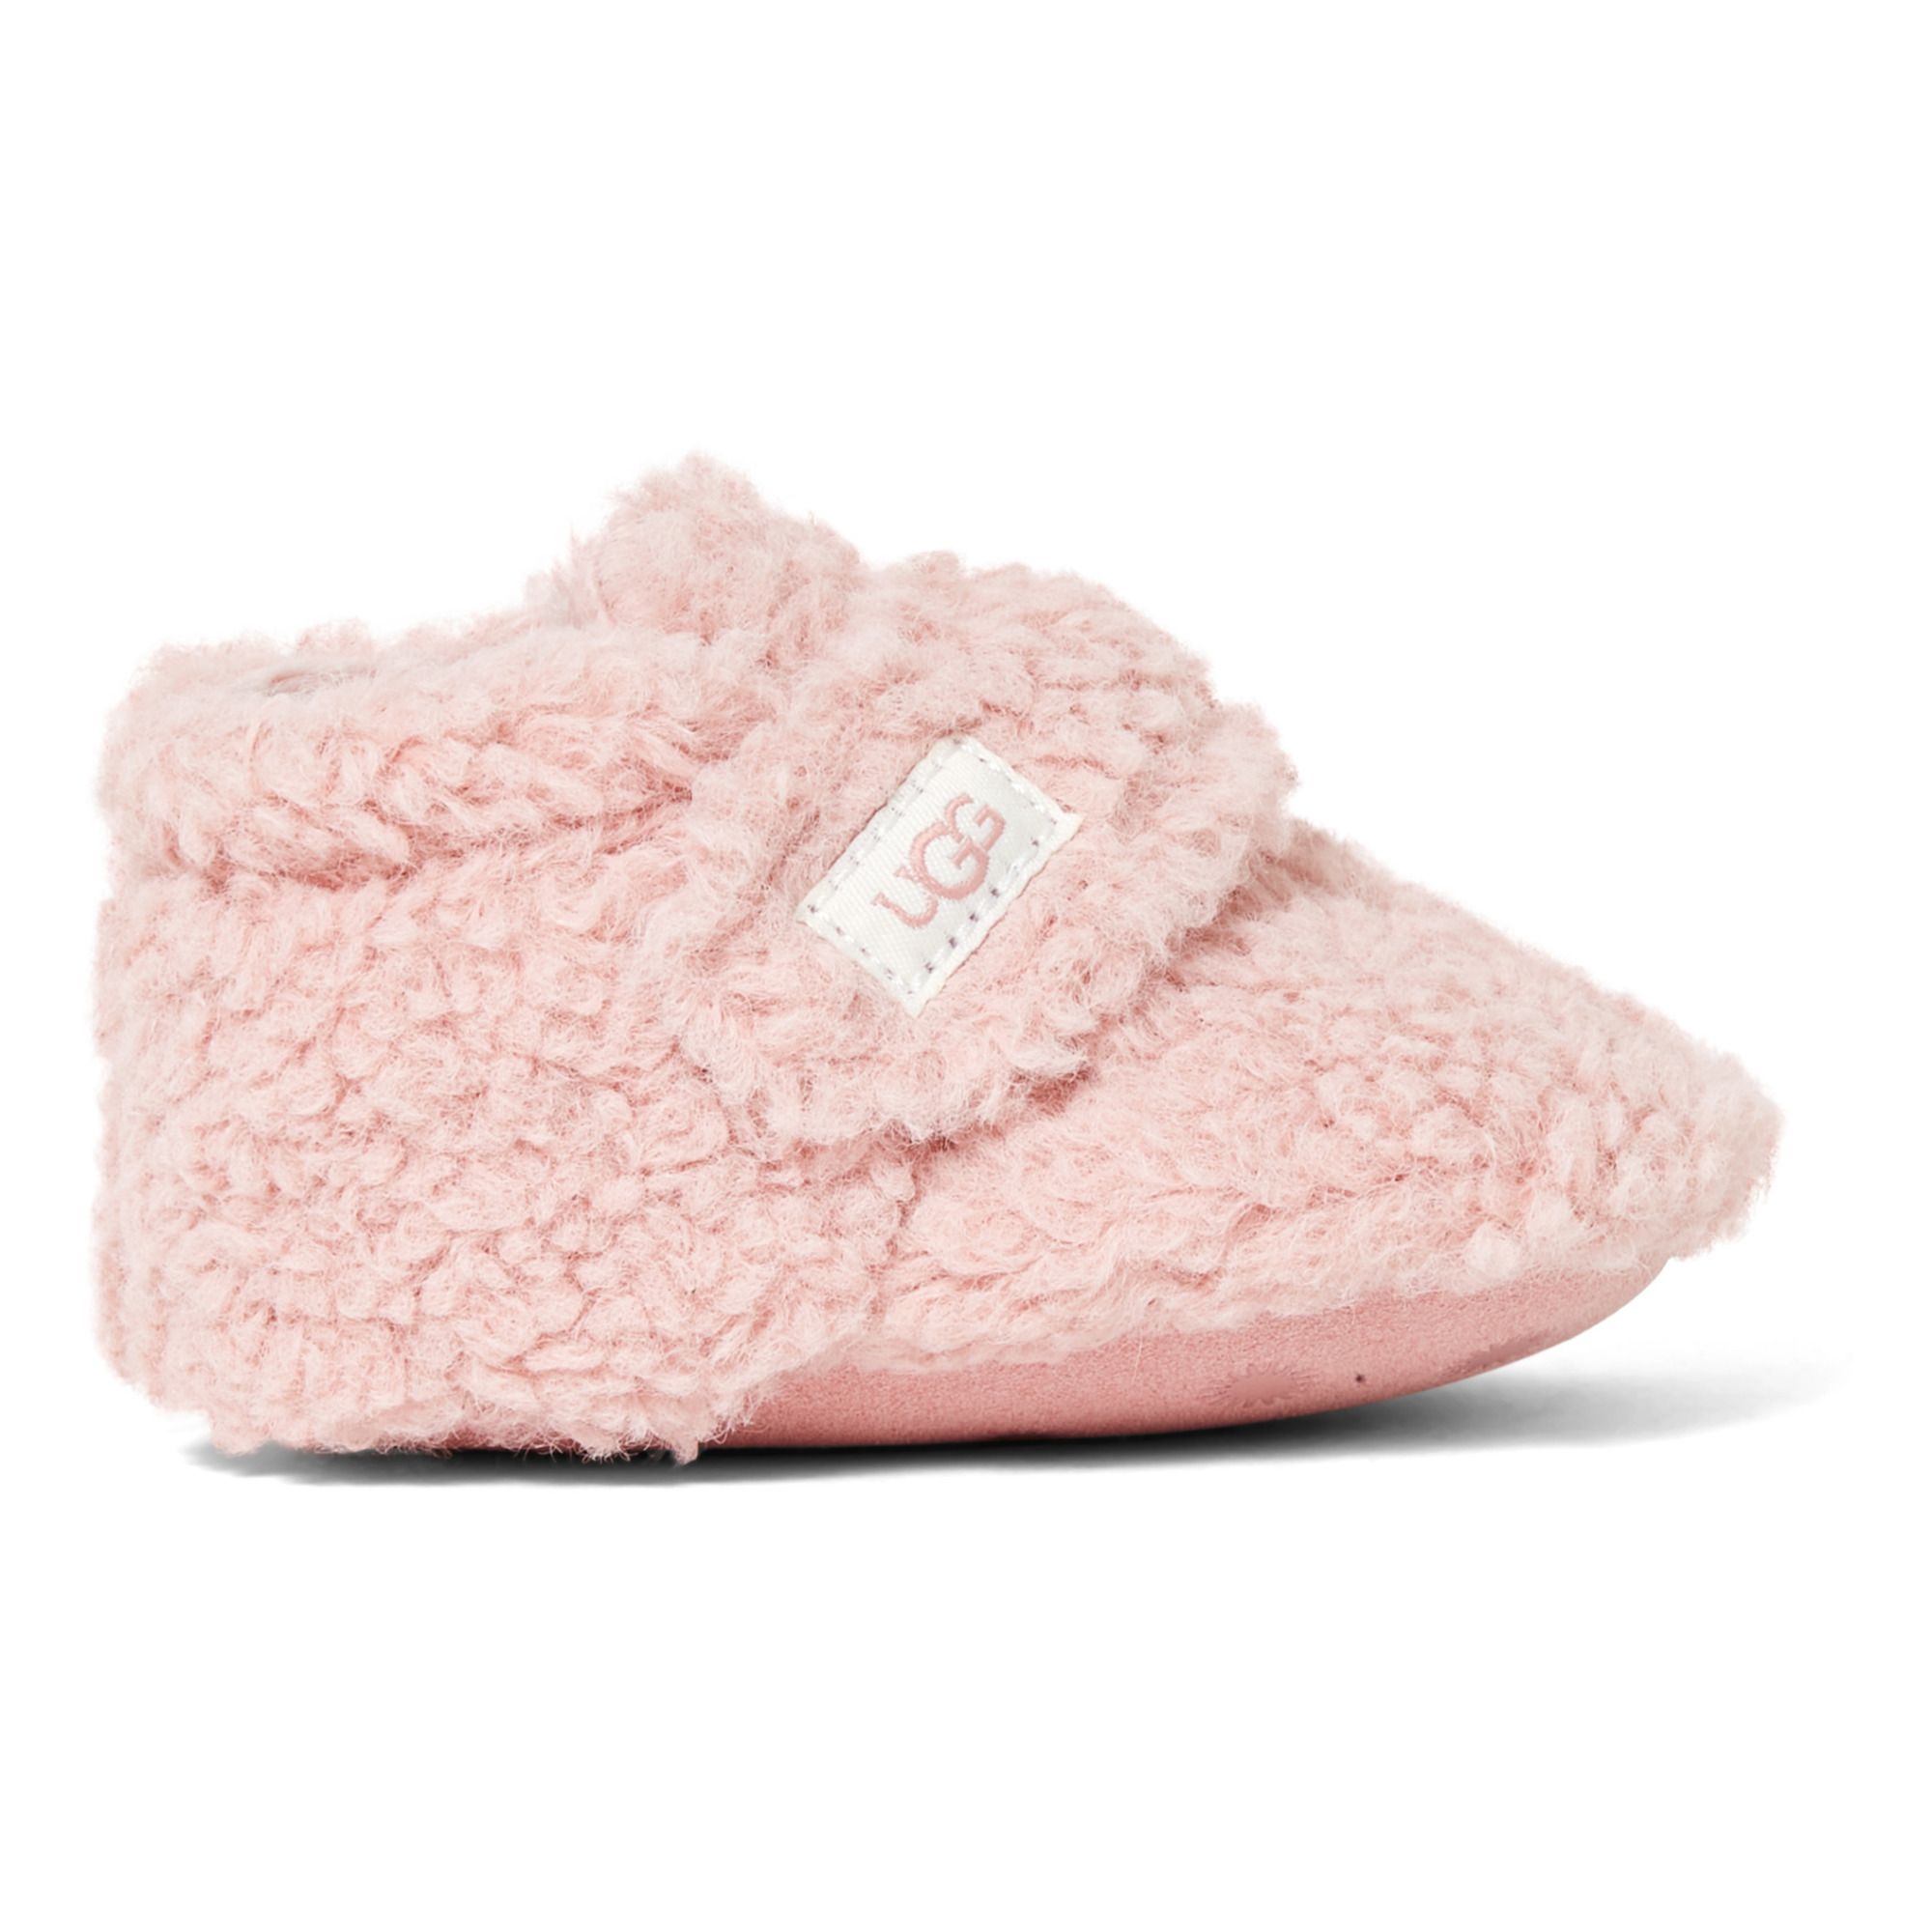 Ugg - Chaussons Bixbee - Fille - Rose